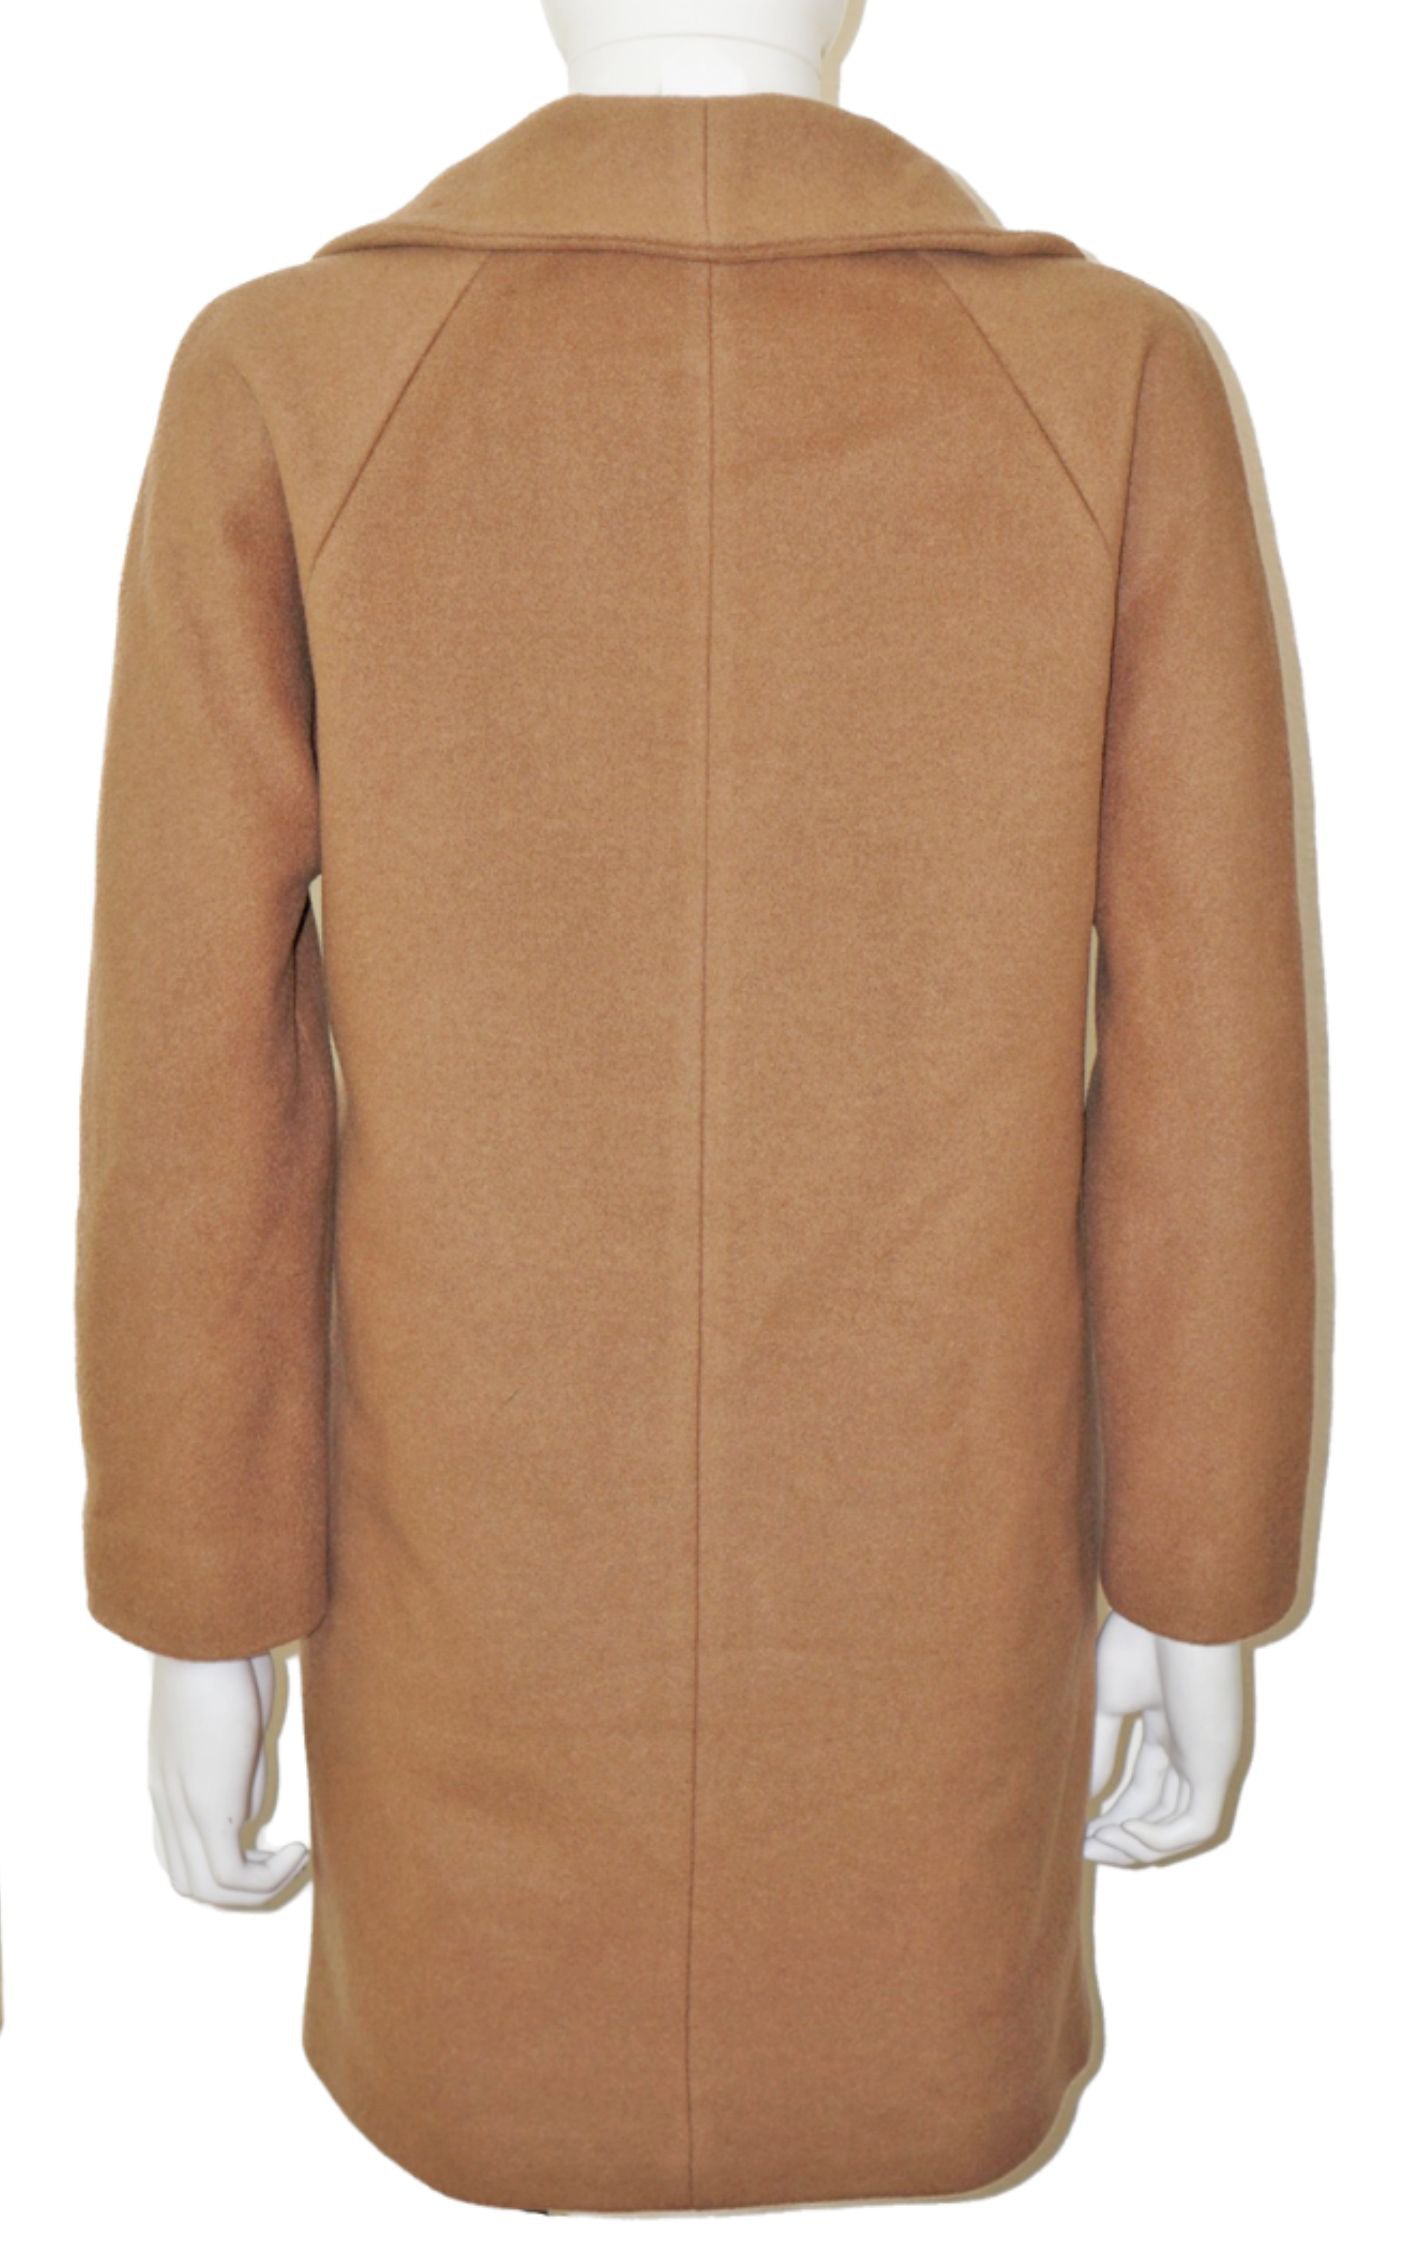 WILFRED Aritzia Camel Wool Collared Buttoned Coat resellum